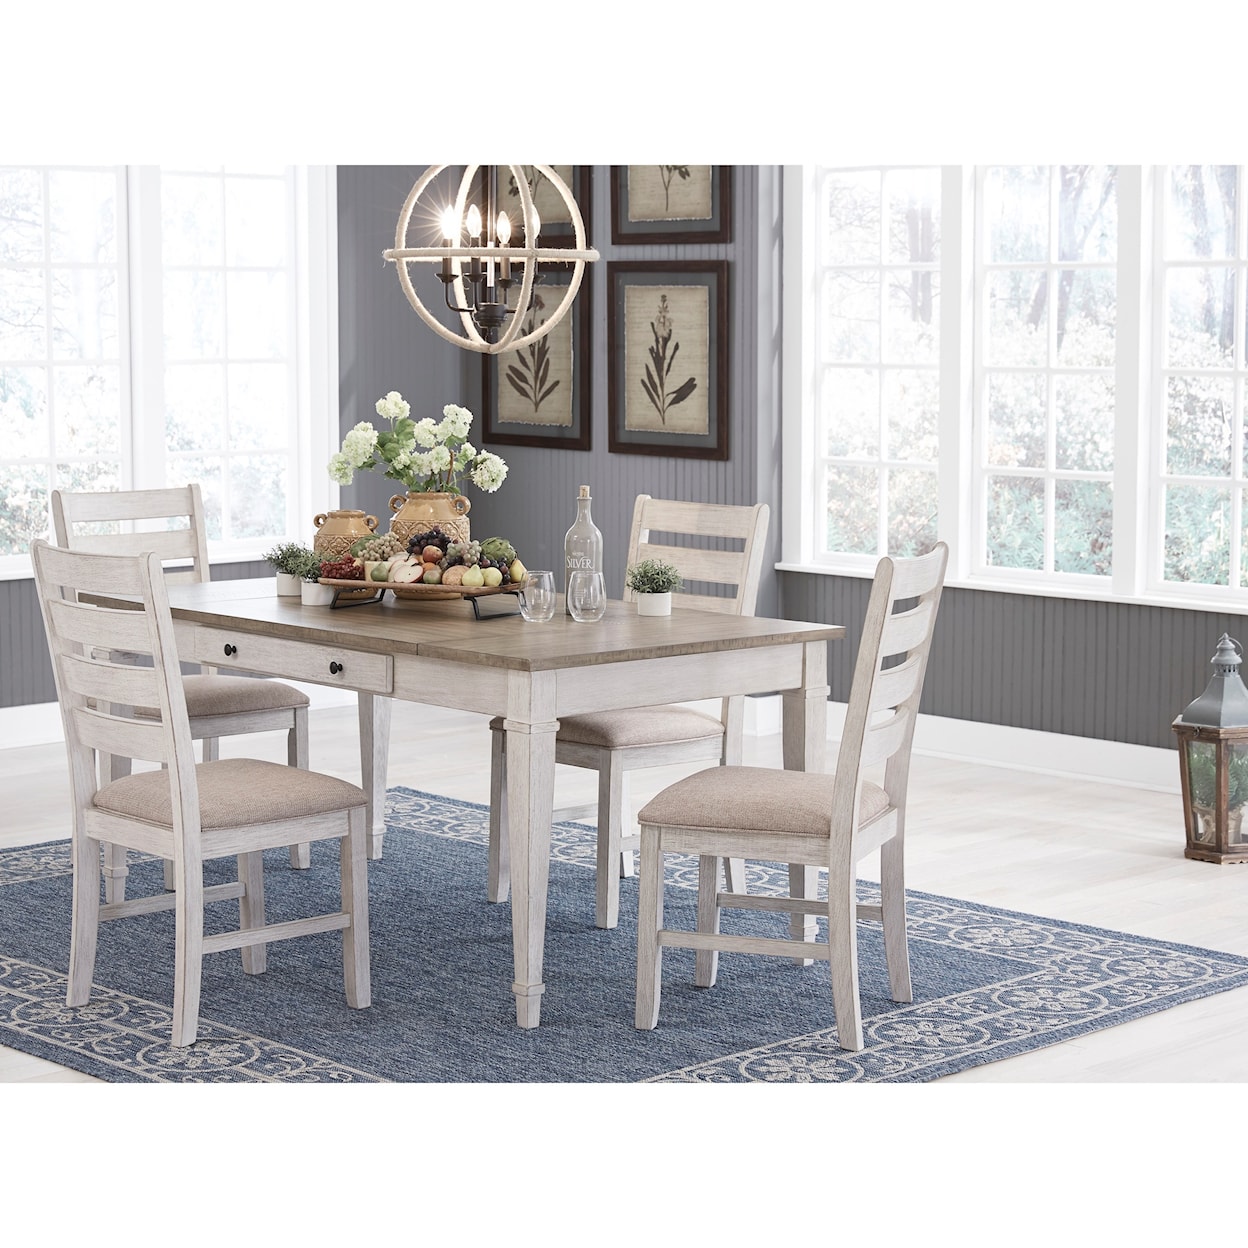 Signature Design by Ashley Skempton 5-Piece Rect. Dining Room Table w/ Storage